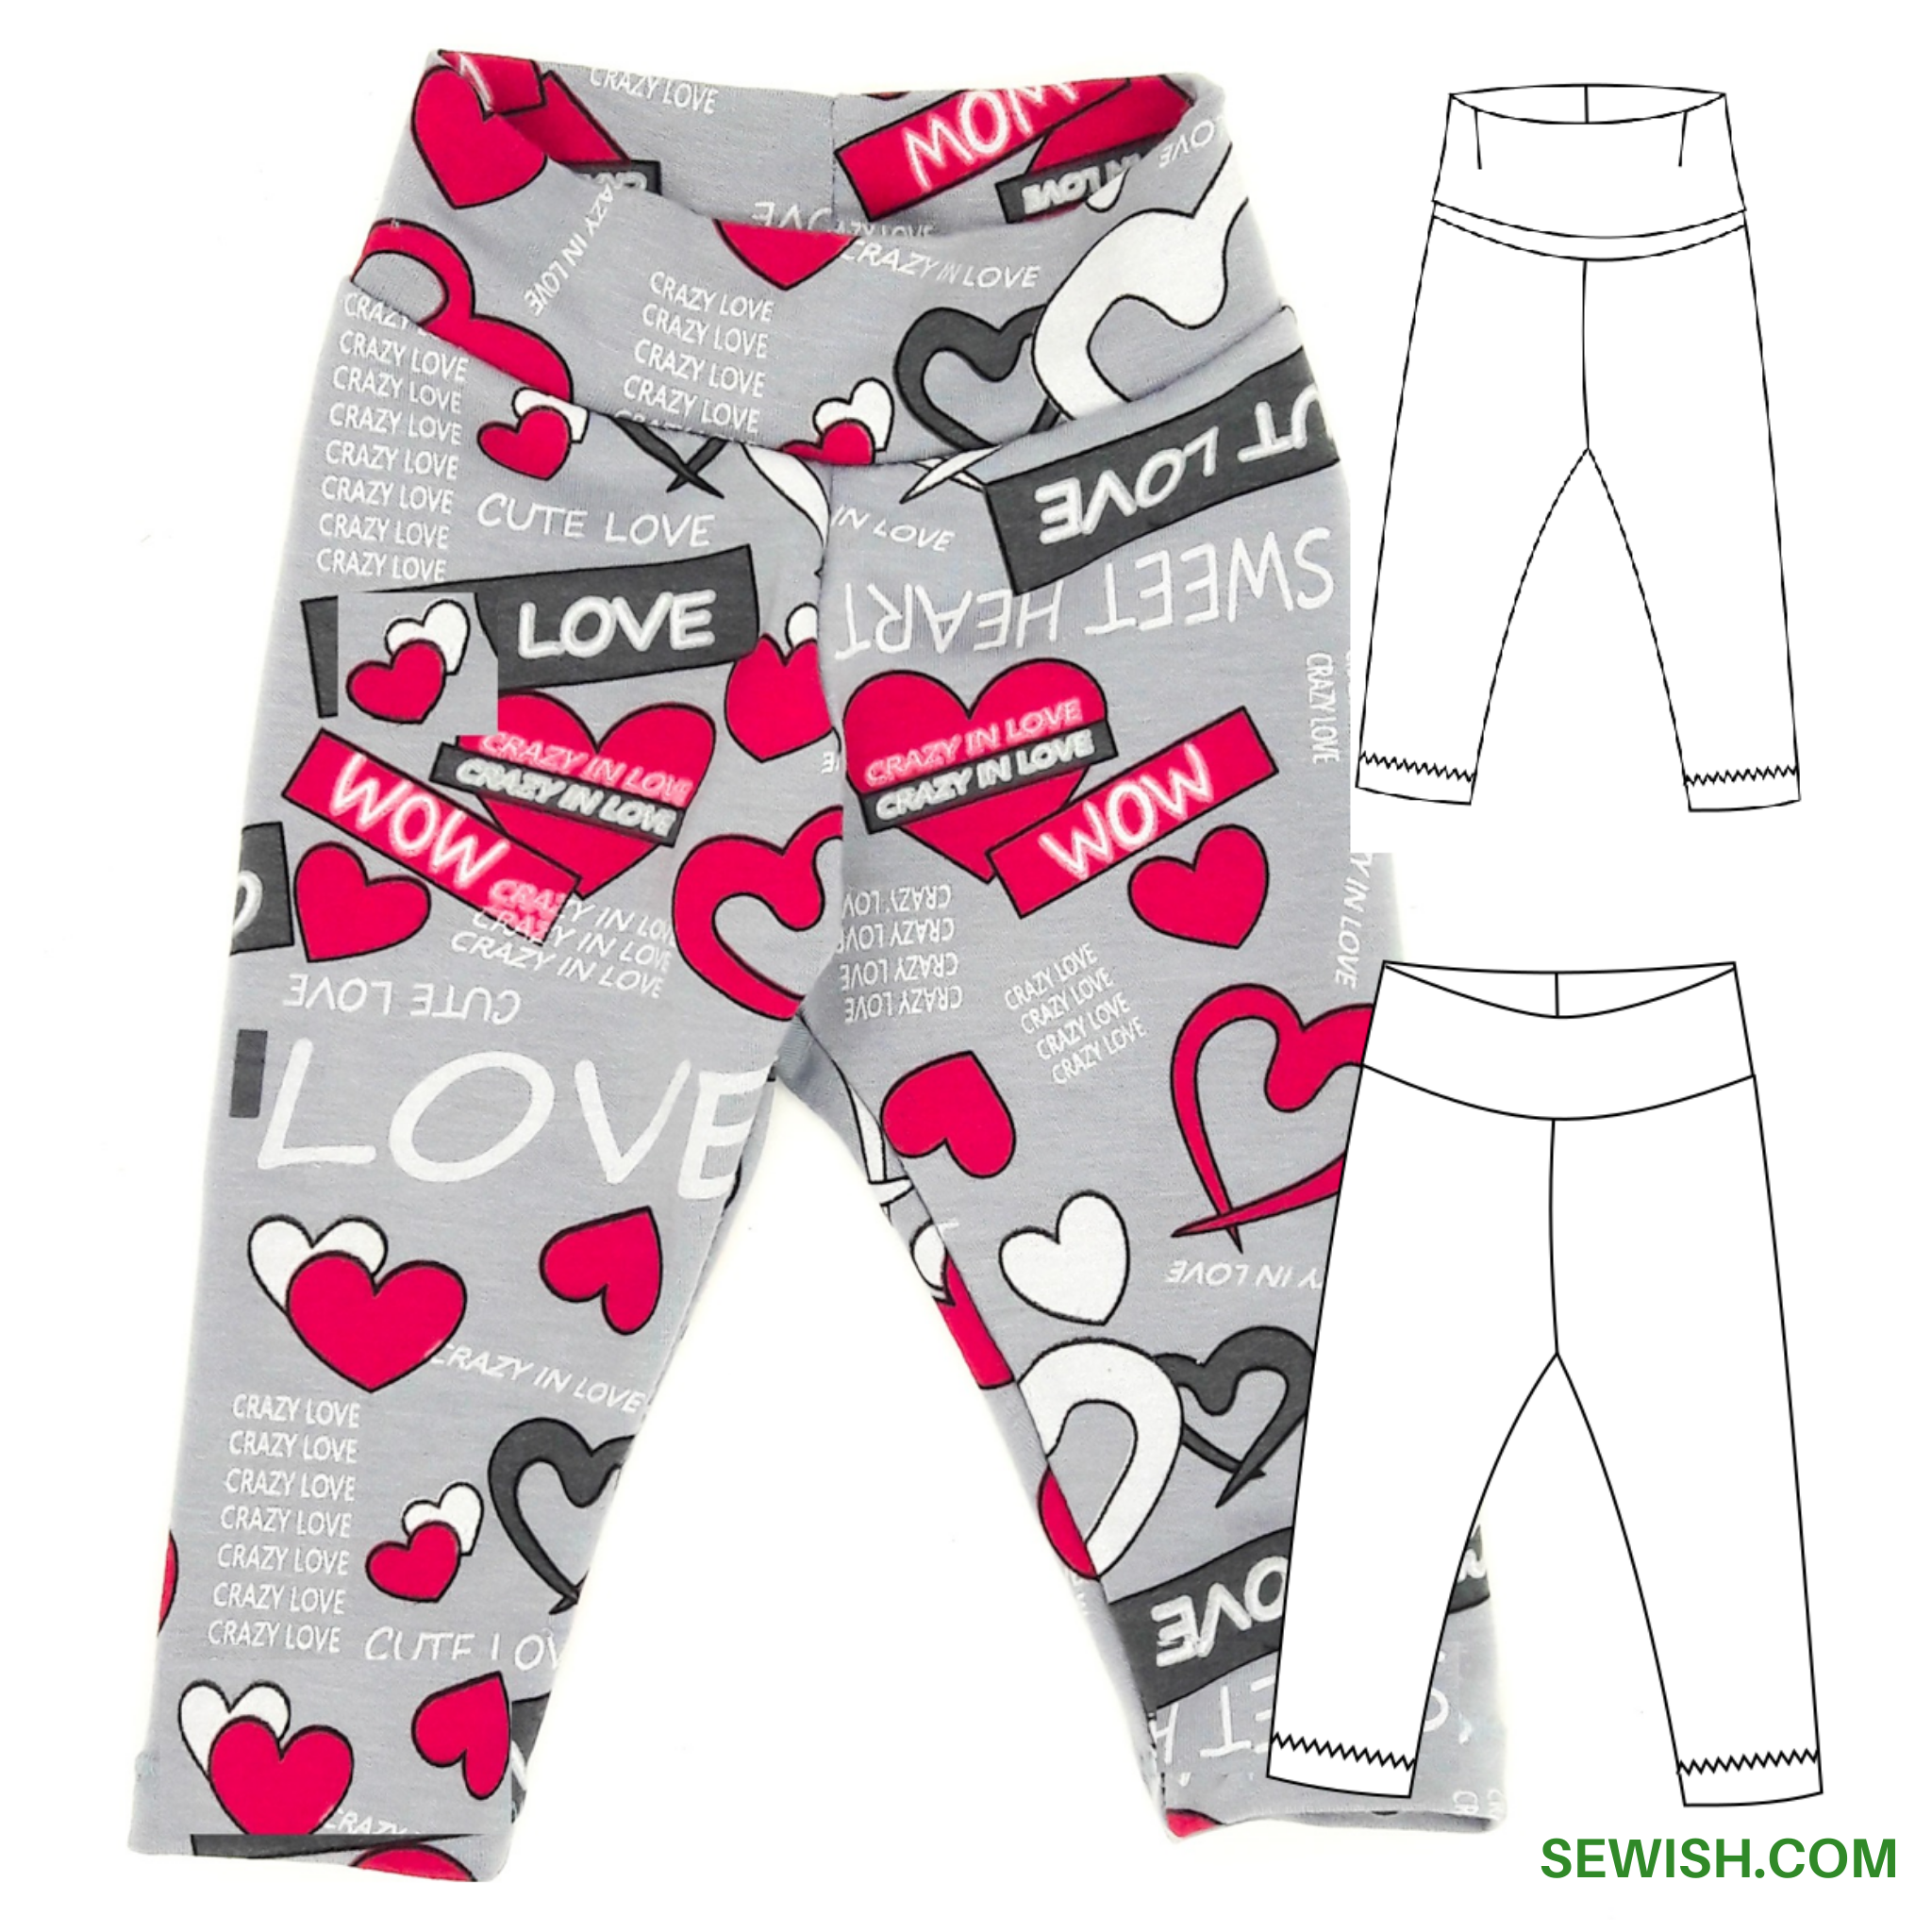 Leggings Baby Sewing Patterns for Girl and Boy Sizes NEWBORN - 12 YEAR –  SEWish